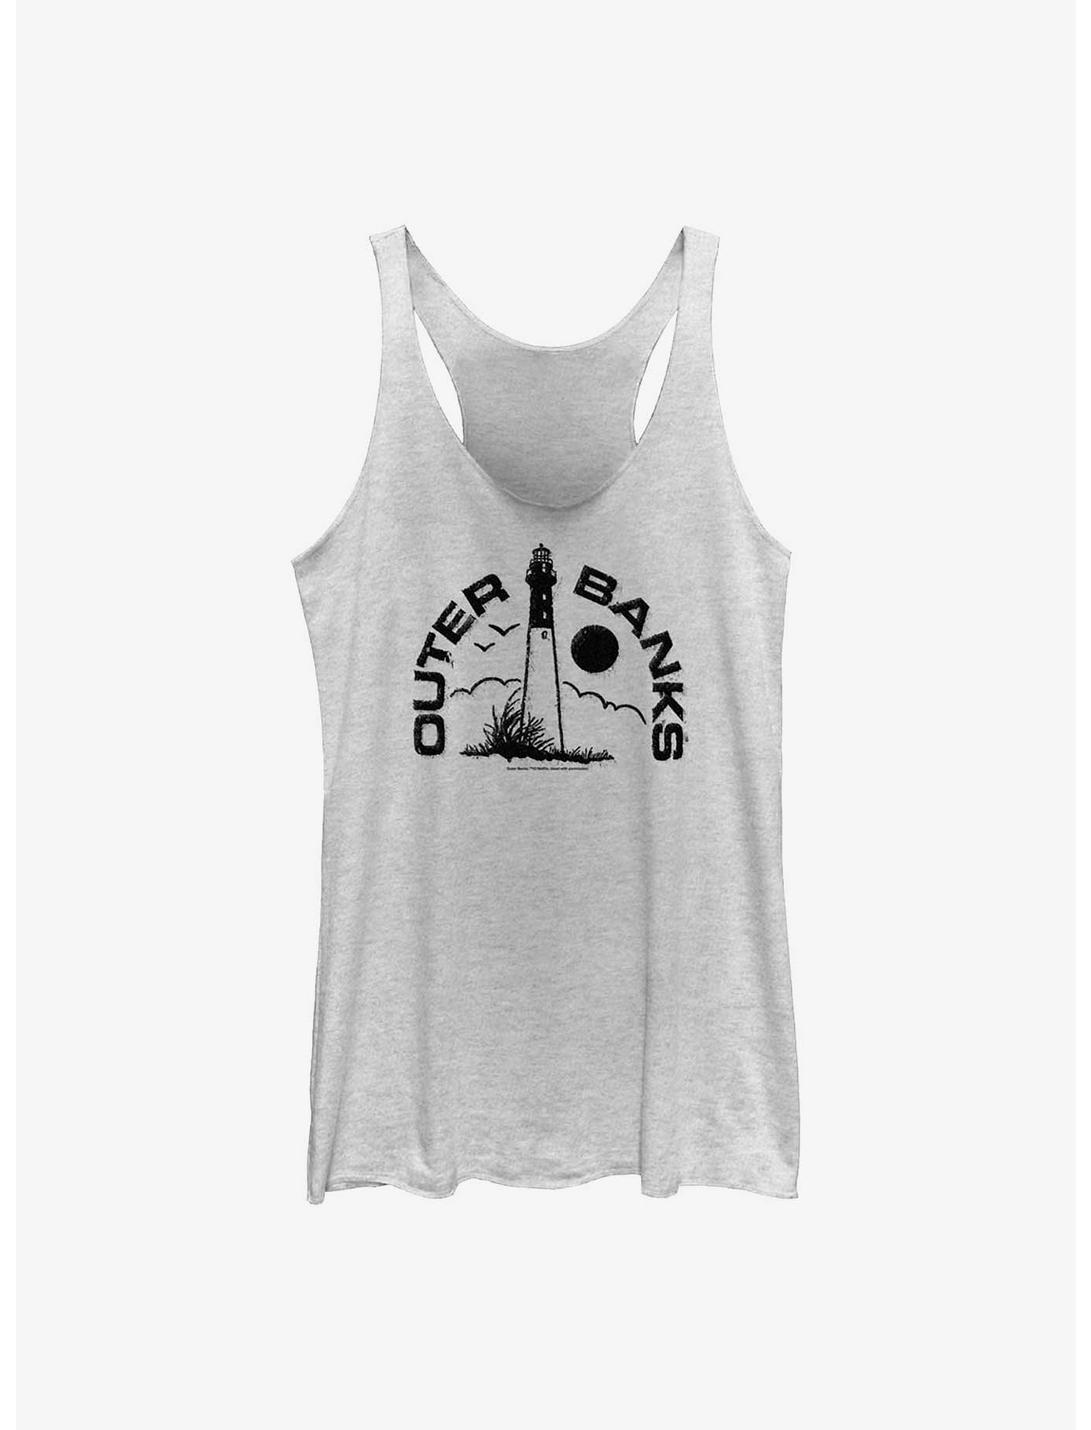 Outer Banks Lighthouse Badge Womens Tank Top, WHITE HTR, hi-res